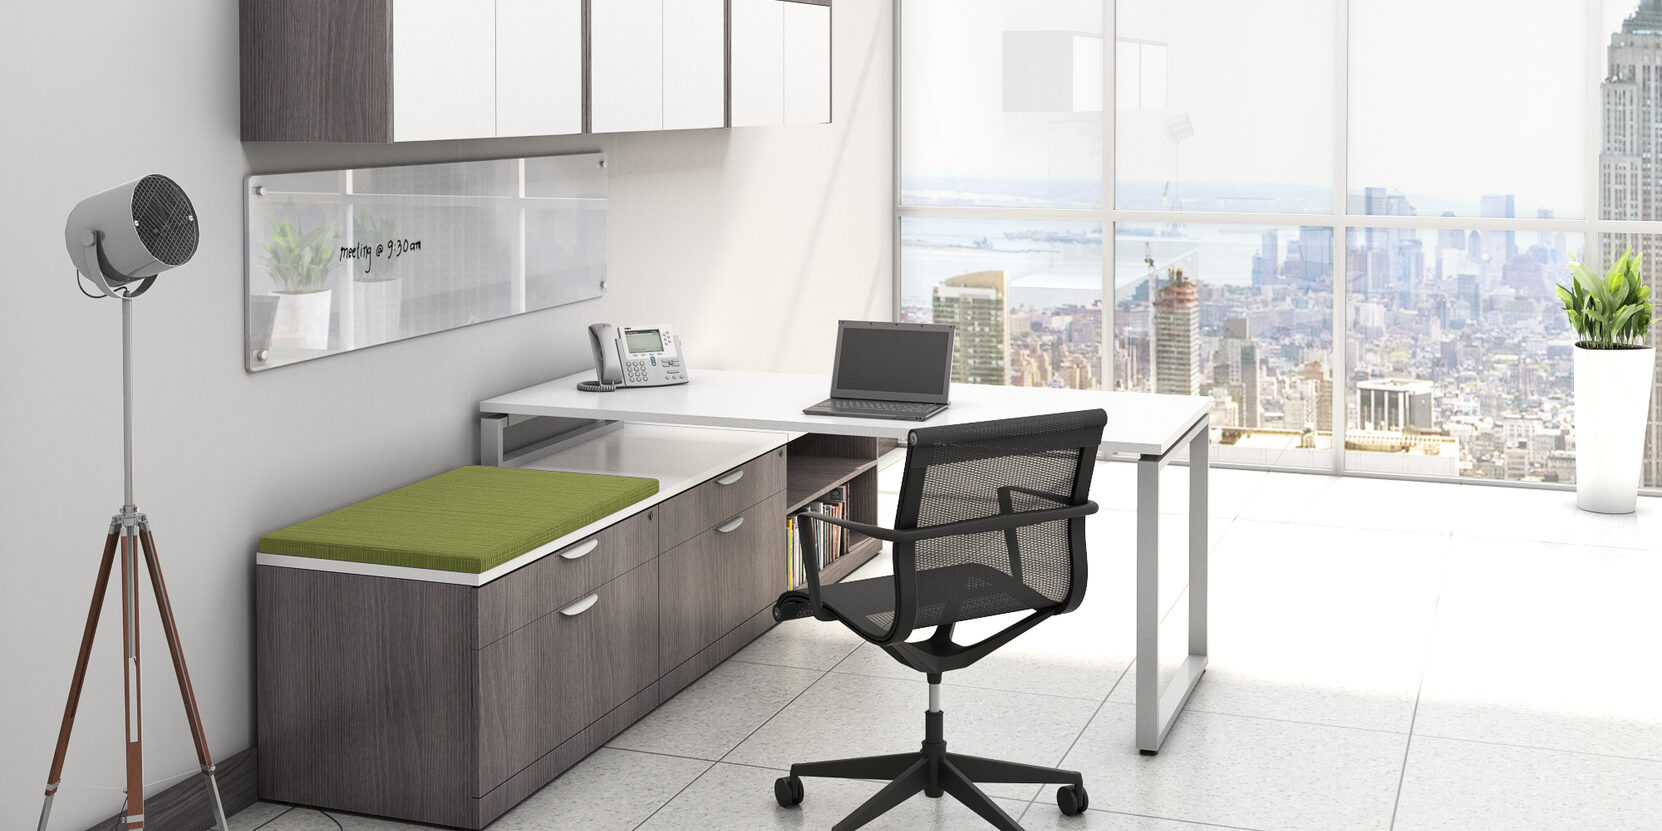 A chair and desk in an office with a view of the city.